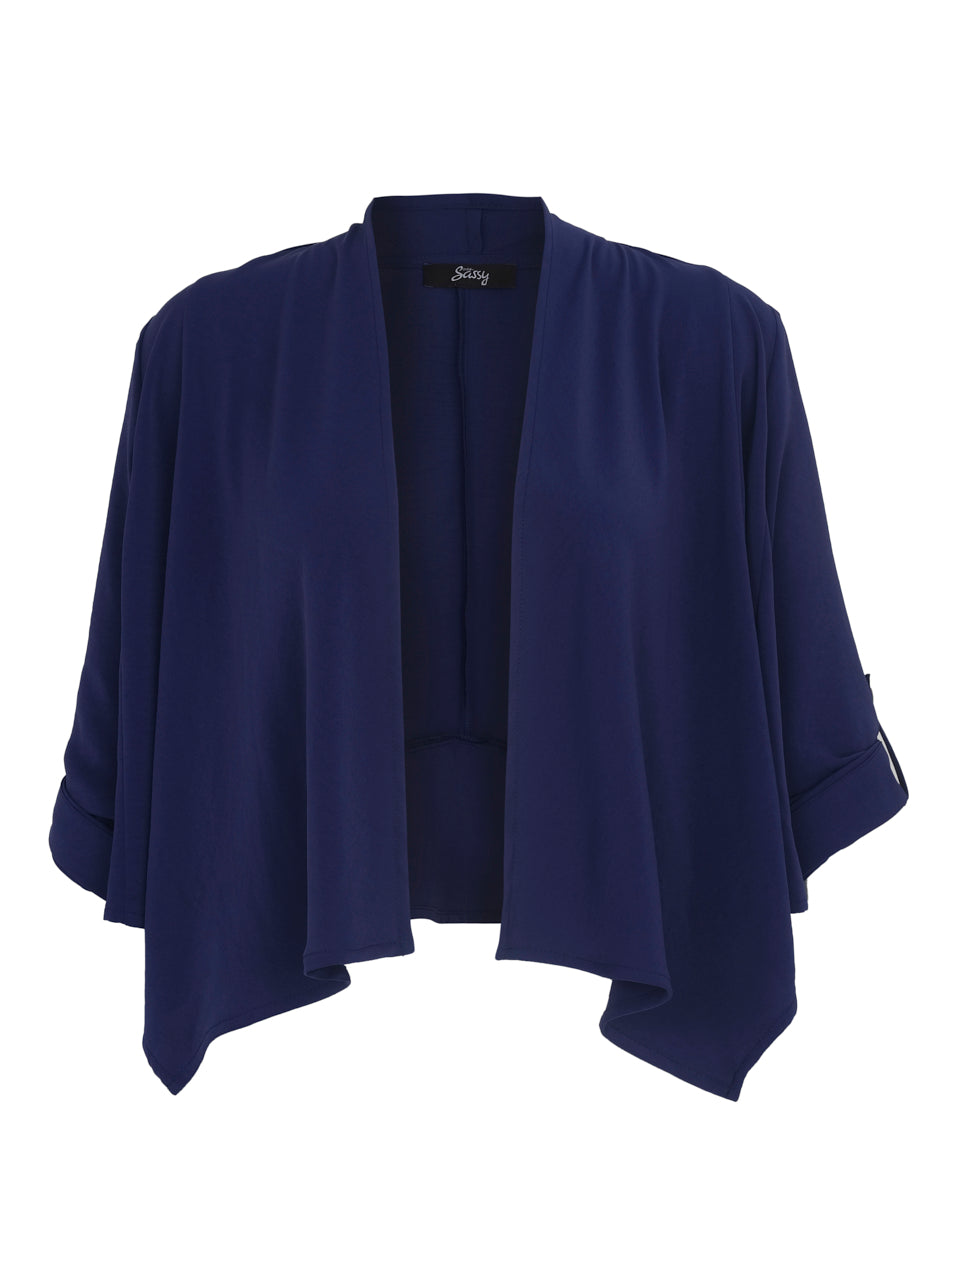 eversassy waterfall style edge to edge crop jacket with turn up sleeve detail in navy (front)